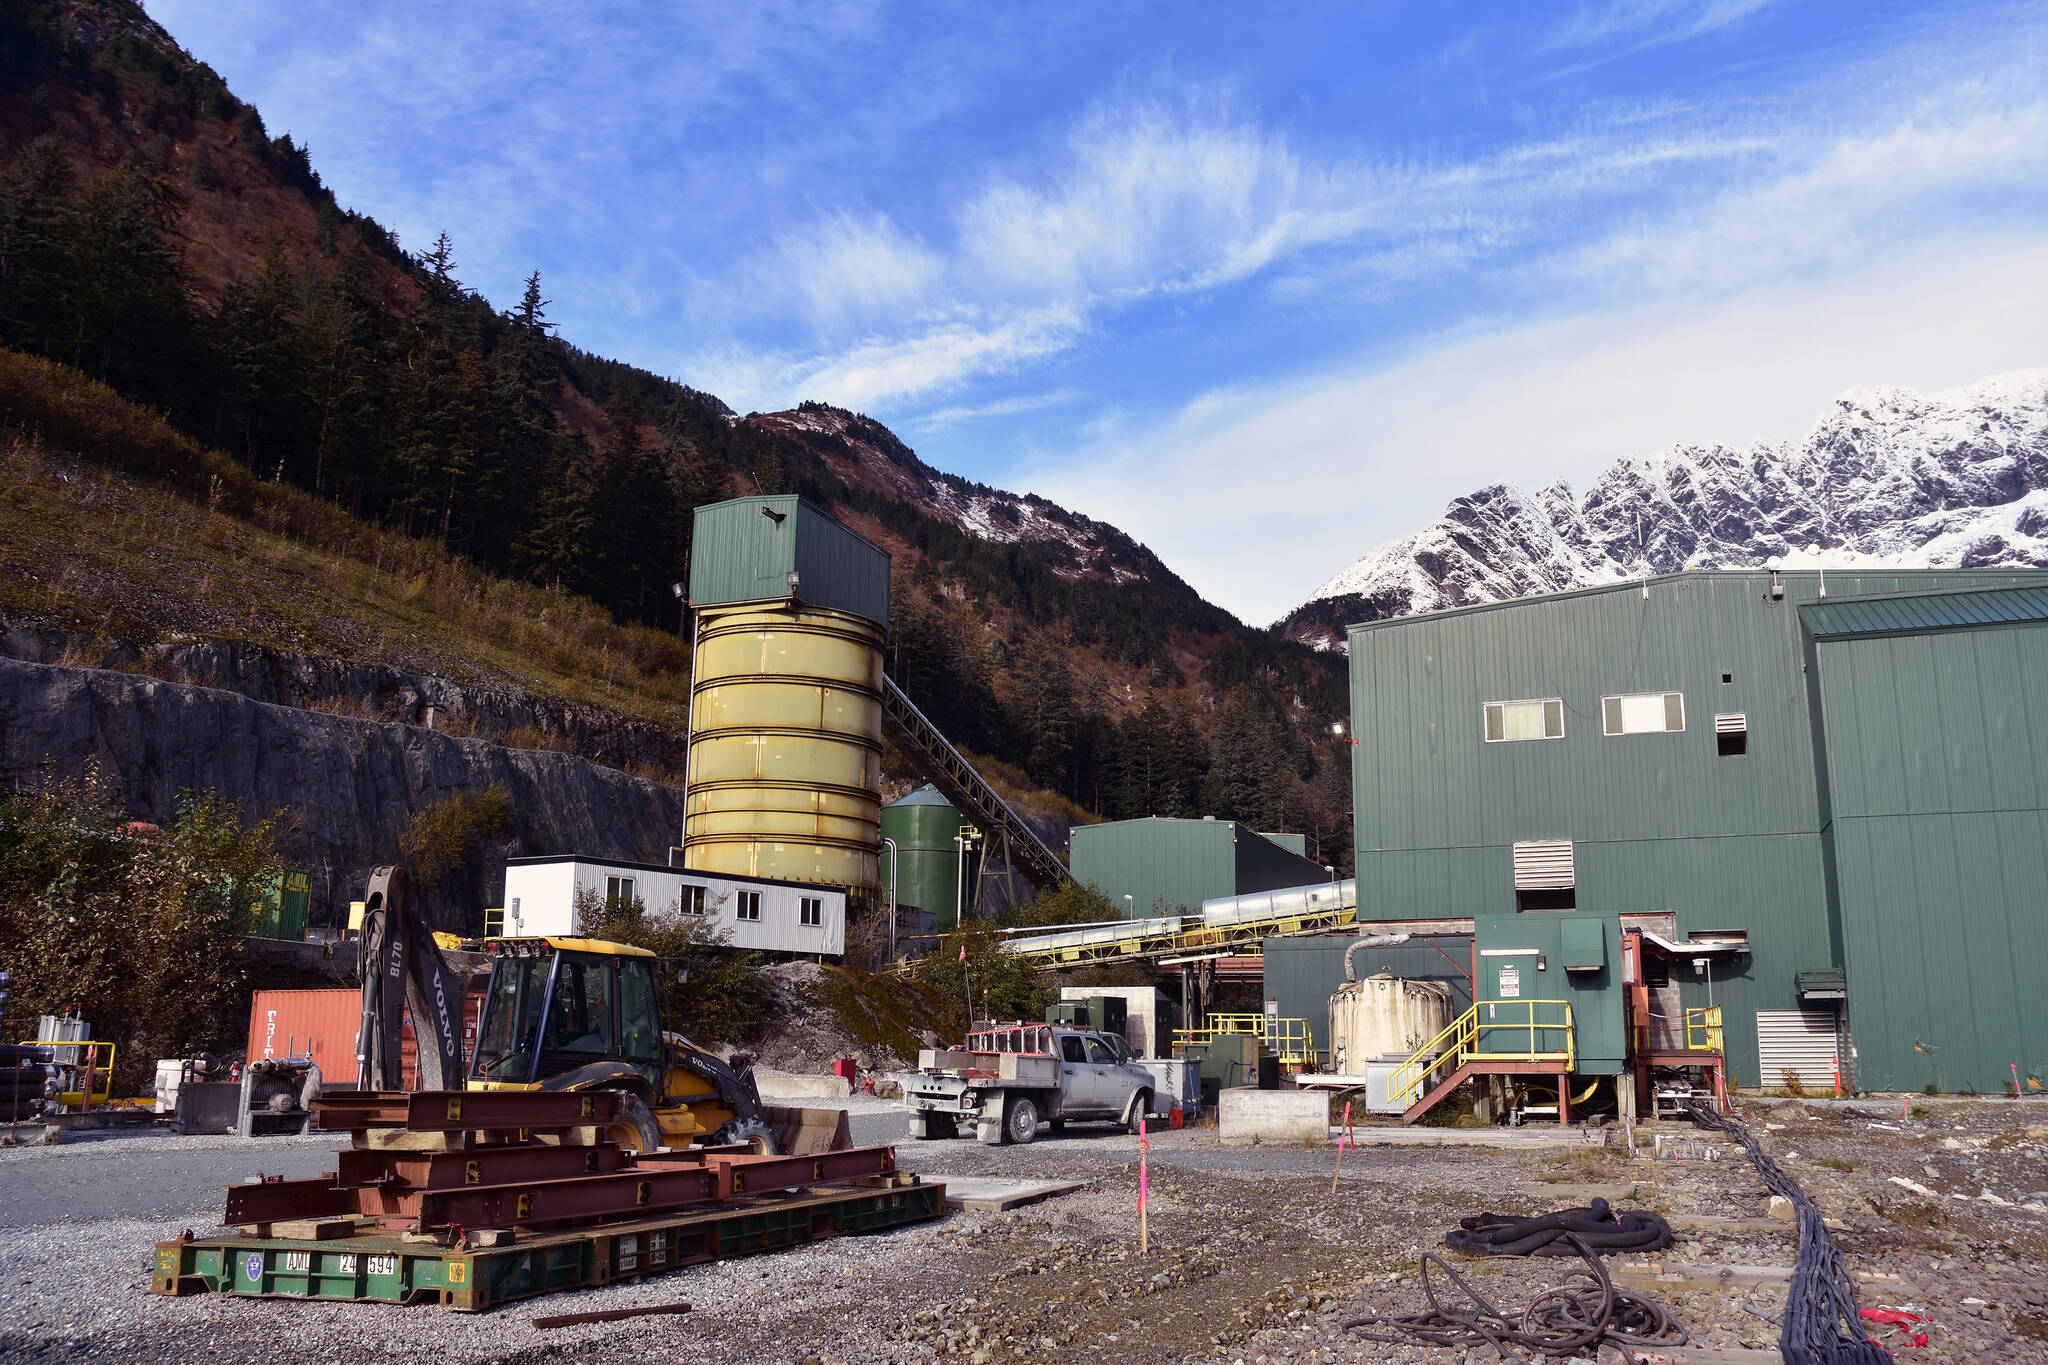 This Empire file photo shows the mill facility at the Kensington Gold Mine on Monday, Oct. 14, 2019. A new study from the Institute of Social and Economic Research at the University of Alaska Anchorage tries to imagine what the state’s mining industry could look like in 20 years. (Peter Segall | Juneau Empire file)